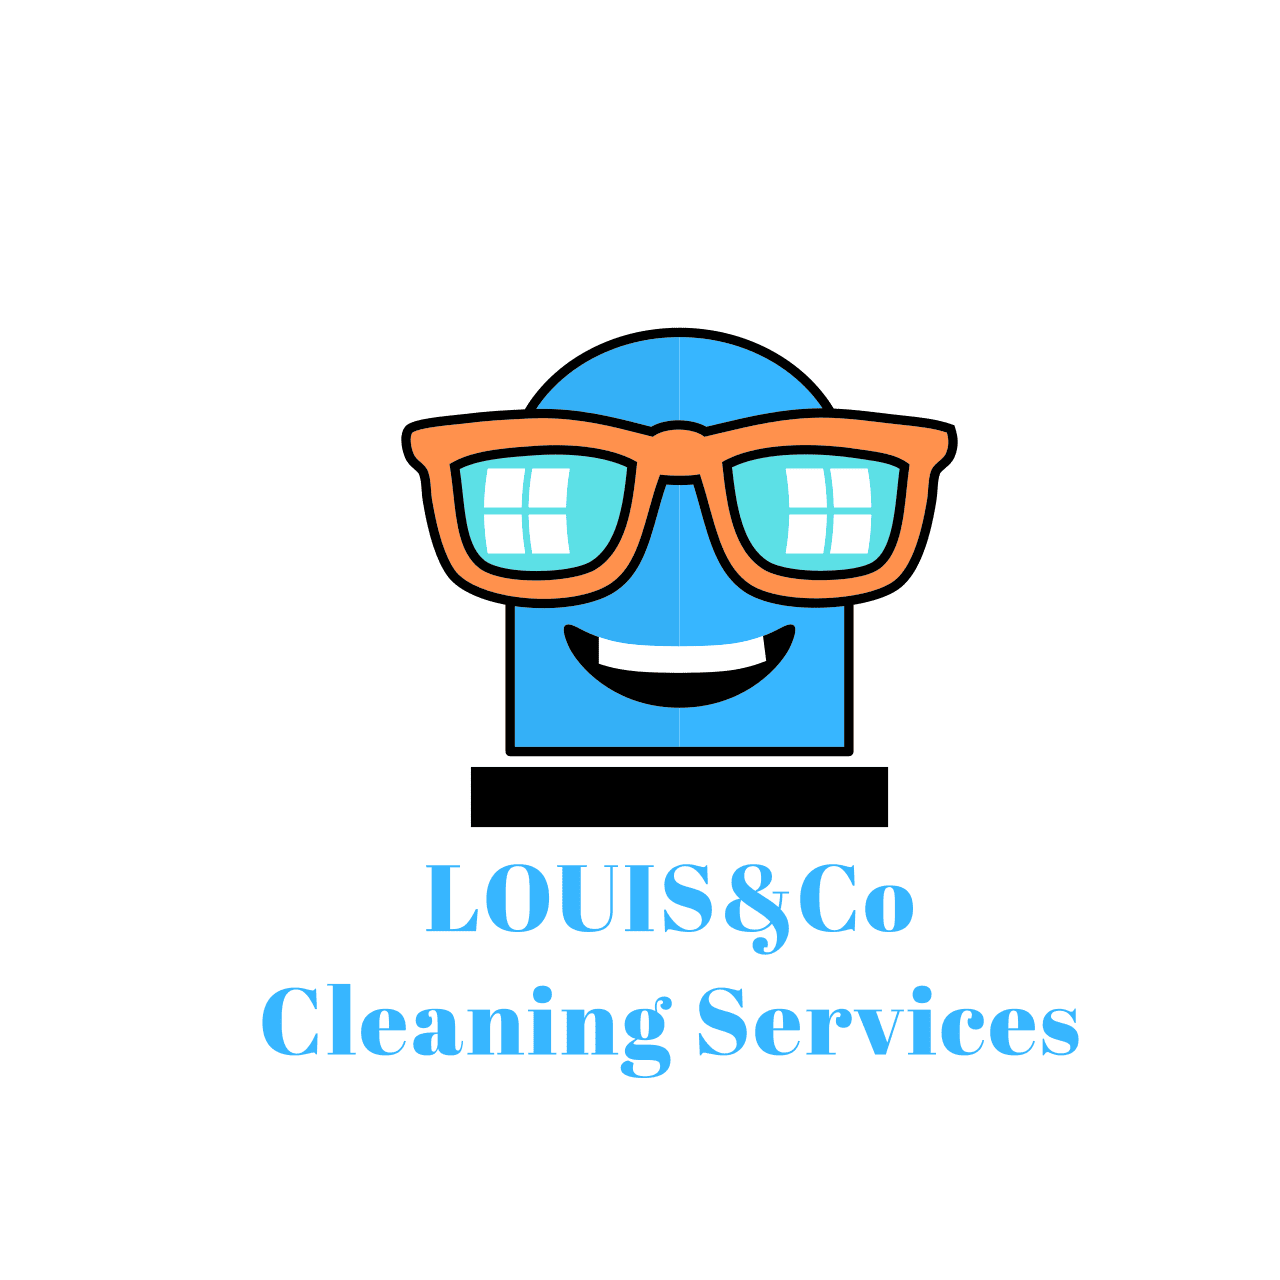 Louis&Co Cleaning Services (Window Cleaning) - Stevenage, Hertfordshire SG2 8JD - 07759 430333 | ShowMeLocal.com